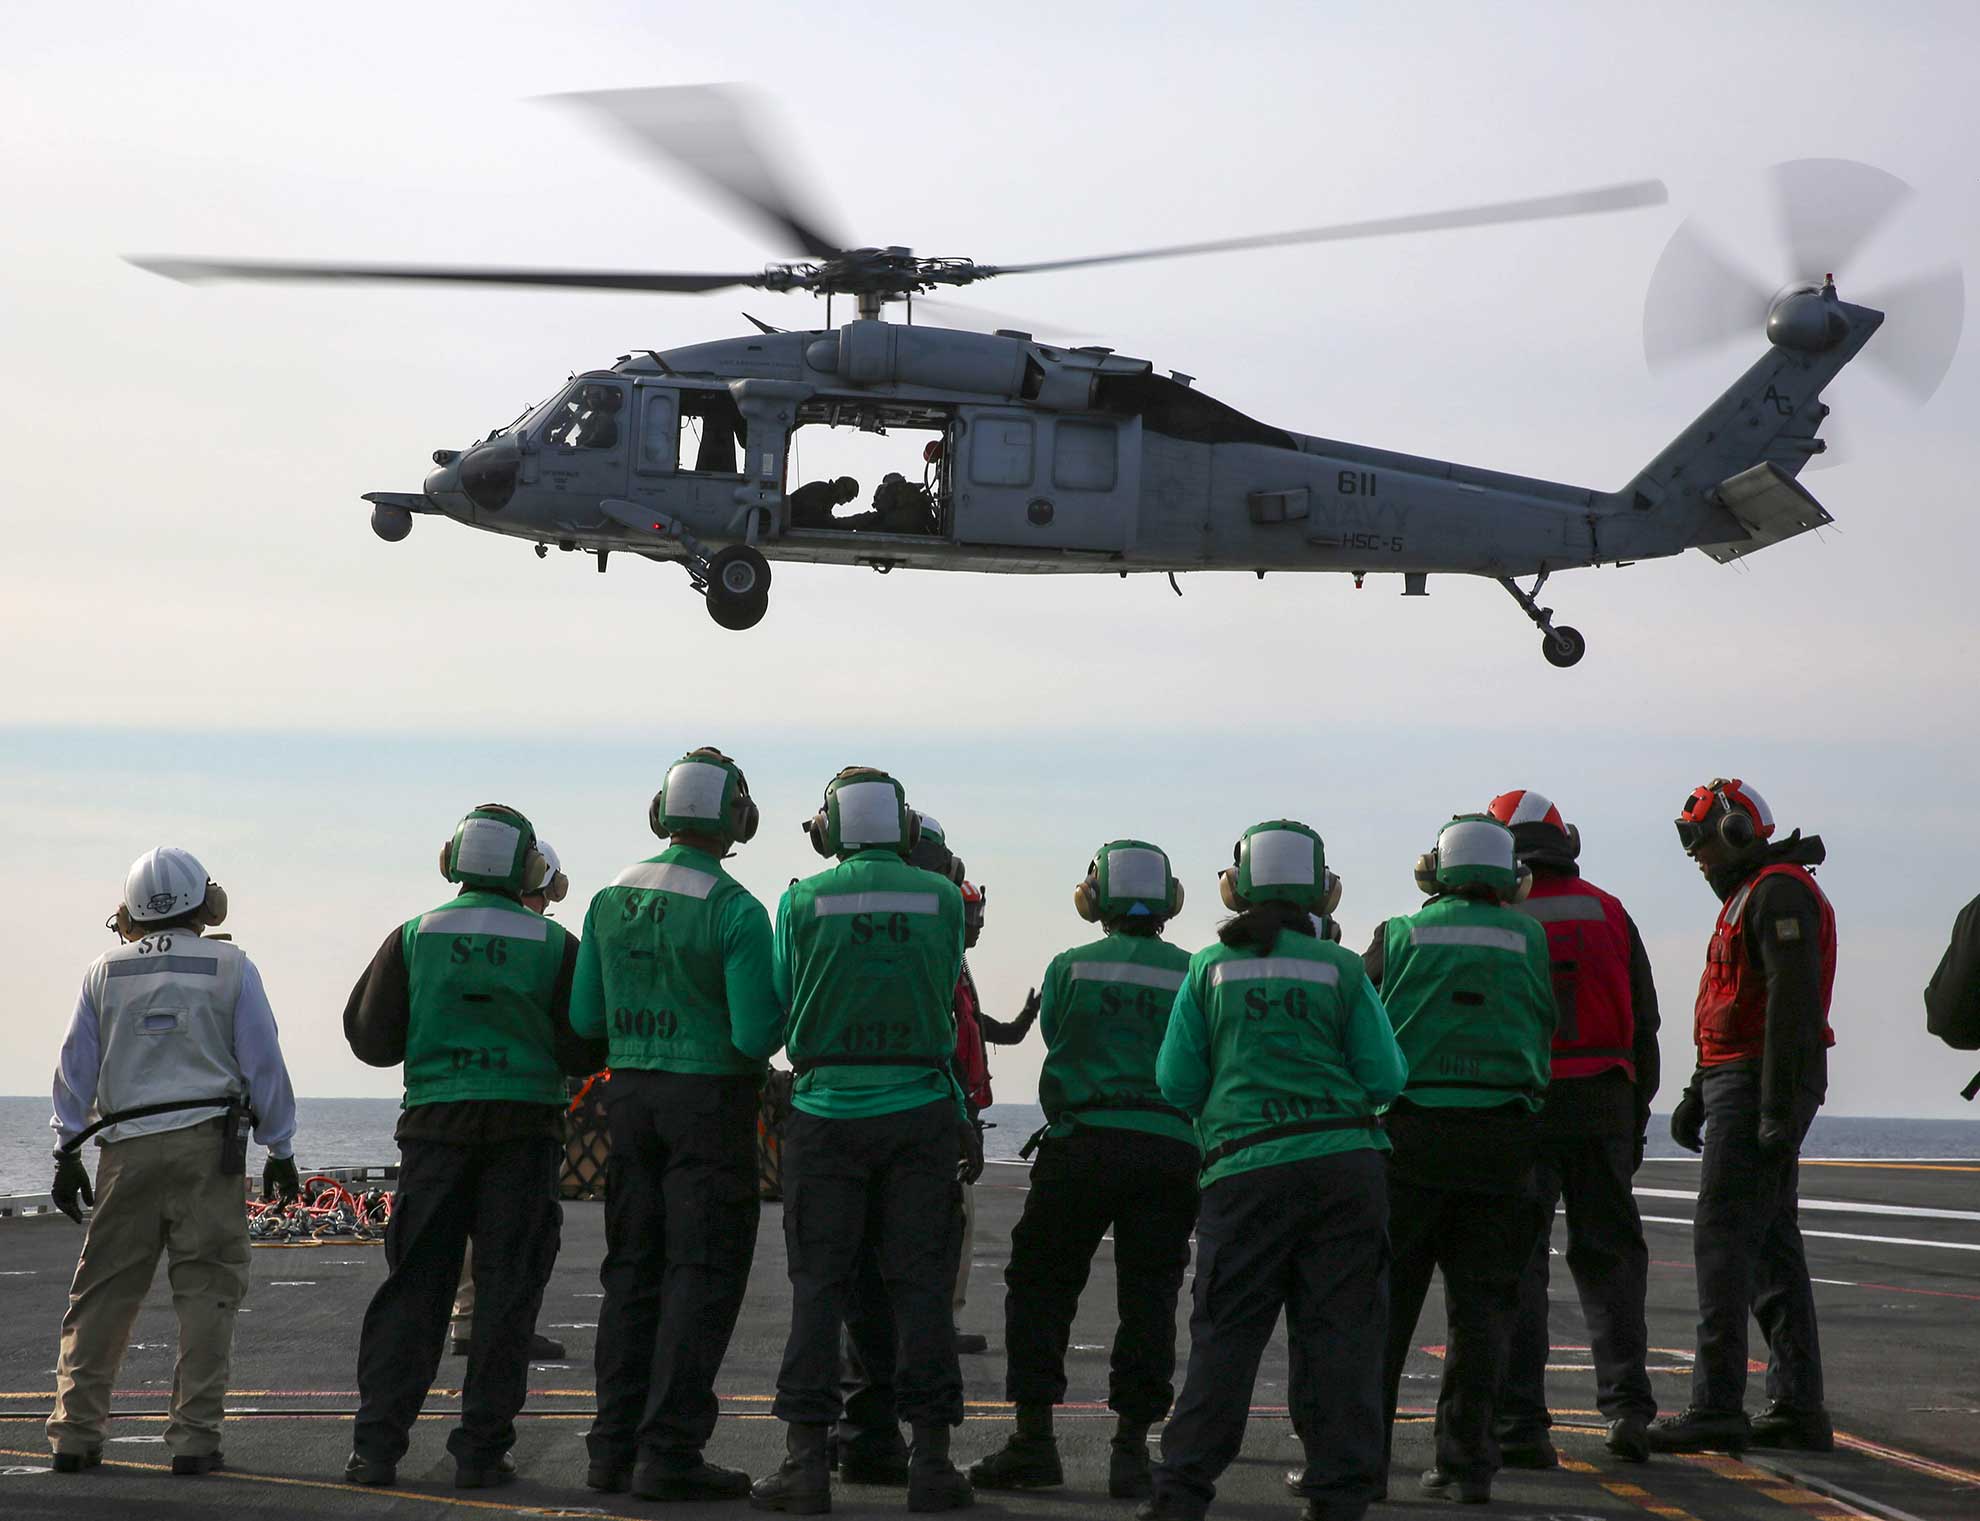 Atlantic Ocean (April 4, 2019) Sailors aboard the Nimitz-class aircraft carrier USS Abraham Lincoln (CVN 72) watch as an MH-60S Sea Hawk helicopter from Helicopter Sea Combat Squadron (HSC) 5 participates in a replenishment-at-sea with the fast combat support ship USNS Arctic (T-AOE 8). Abraham Lincoln is underway as part of the Abraham Lincoln Carrier Strike Group (ABECSG) deployment in support of maritime security cooperation efforts in the U.S. 5th, 6th and 7th Fleet areas of responsibility. With Abraham Lincoln as the flagship, deployed strike group assets include staffs, ships and aircraft of Carrier Strike Group 12 (CSG 12), Destroyer Squadron 2 (DESRON 2), USS Leyte Gulf (CG 55) and Carrier Air Wing 7 (CVW 7); as well as Alvaro de Bazan-class frigate ESPS M©ndez Nez (F 104) -- U.S. Navy photo by MCS 3rd Class Jeremiah Bartelt. -